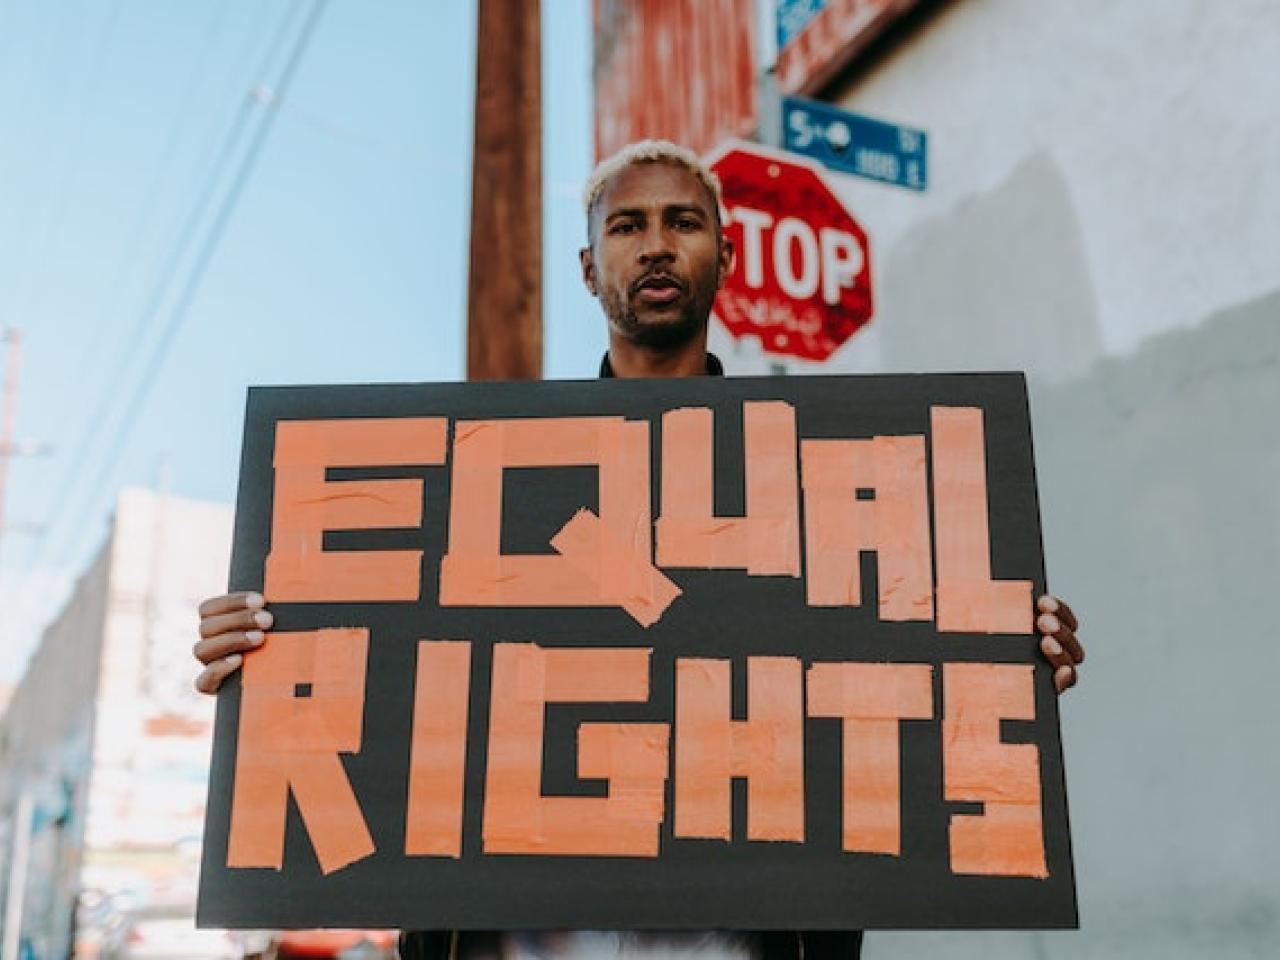 A man is holding up a homemade sign that says "equal rights". There is a stop sign and a cityscape behind him.